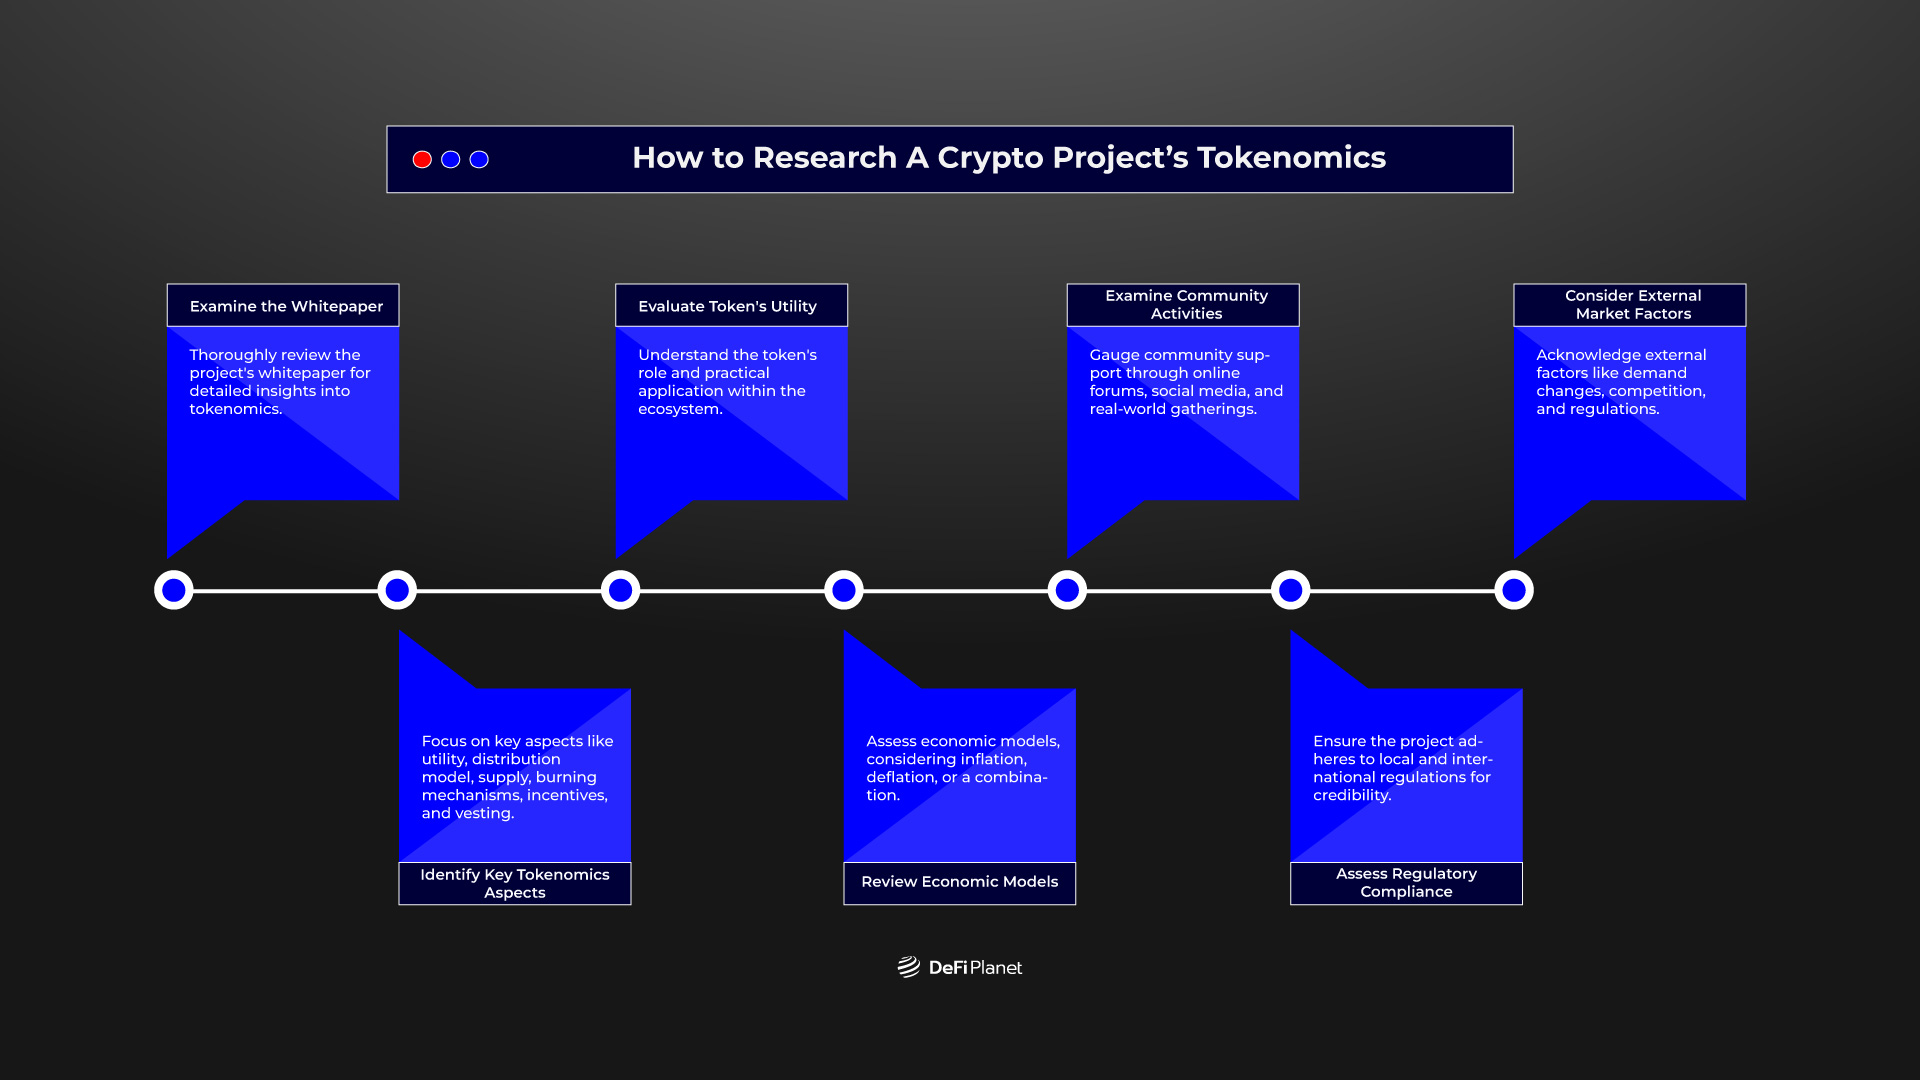 How to Research A Crypto Project’s Tokenomics 